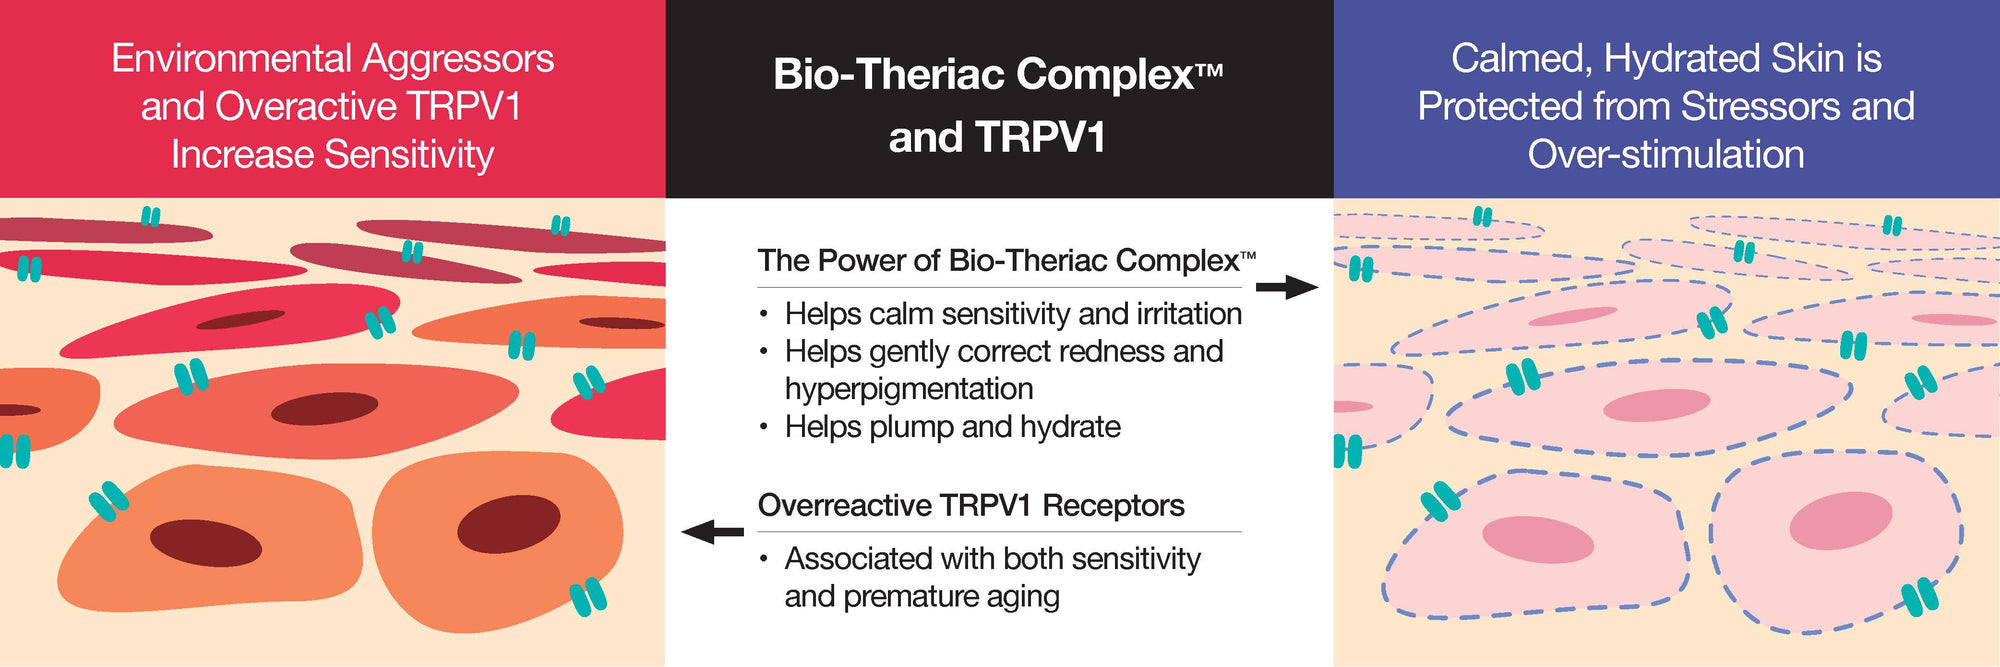 The effect of Bio-Theriac Complex on the skin. Bio-Theriac Complex helps calm sensitivity and irritation, gently correct redness and hyperpigmentation, and pump and hydrate skin. 